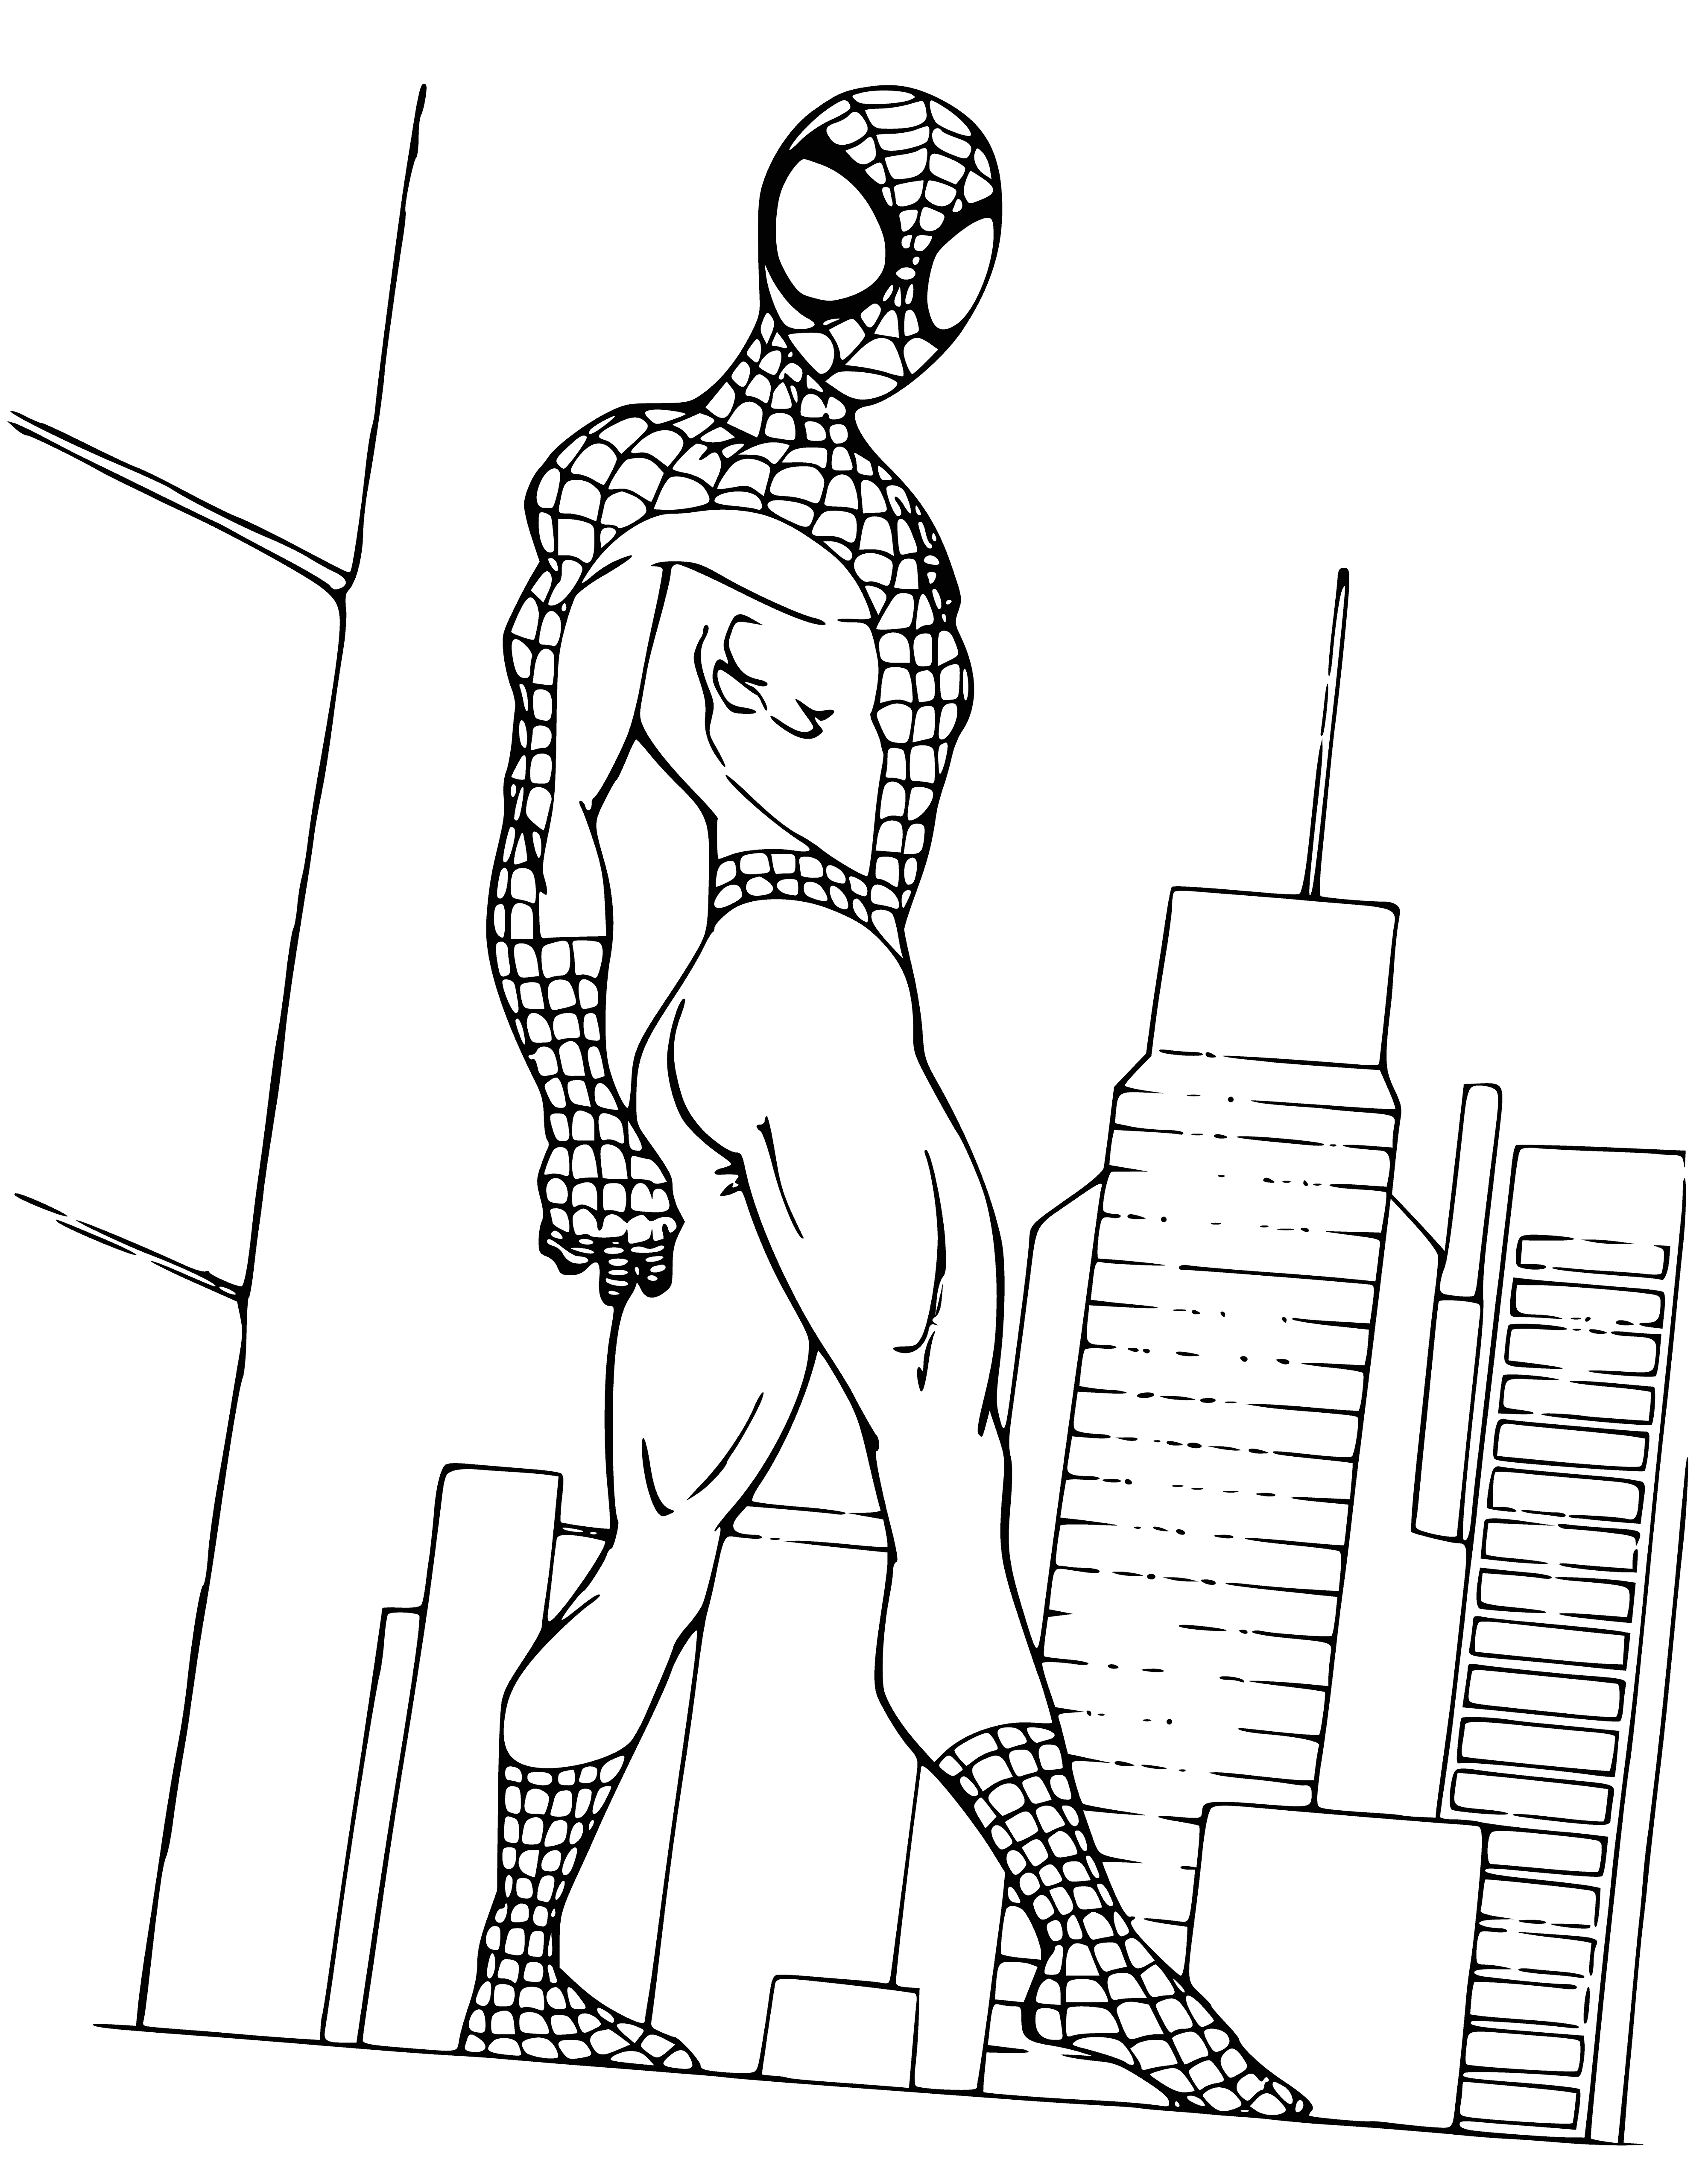 coloring page: Spider-Man is perched on a building, webbed suit & rope of webbing in hand, ready to protect the cityscape behind him.